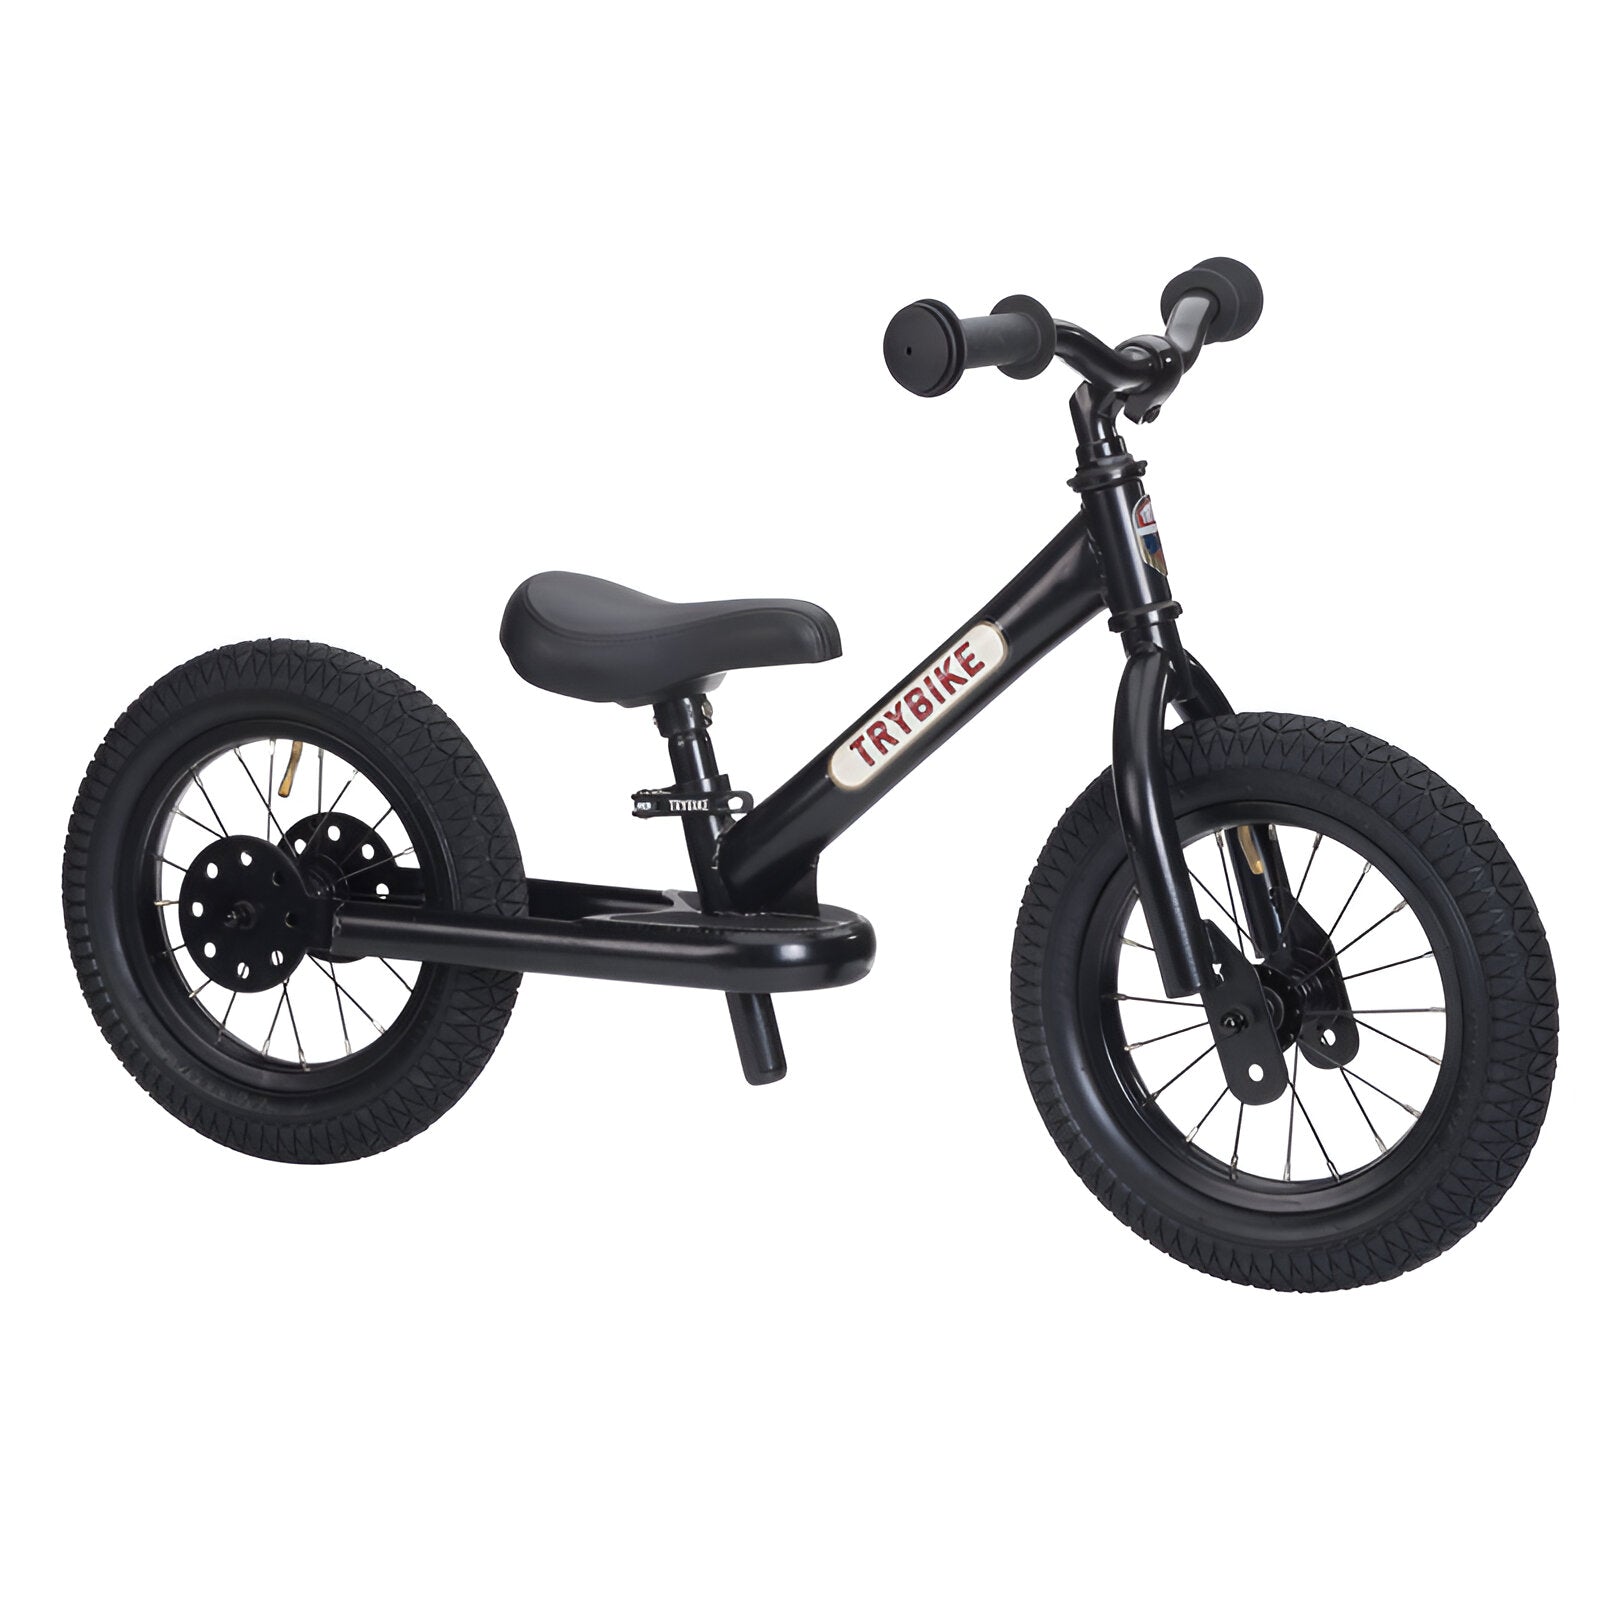 Sturdy and stylish Trybike Black designed for children's adventures.